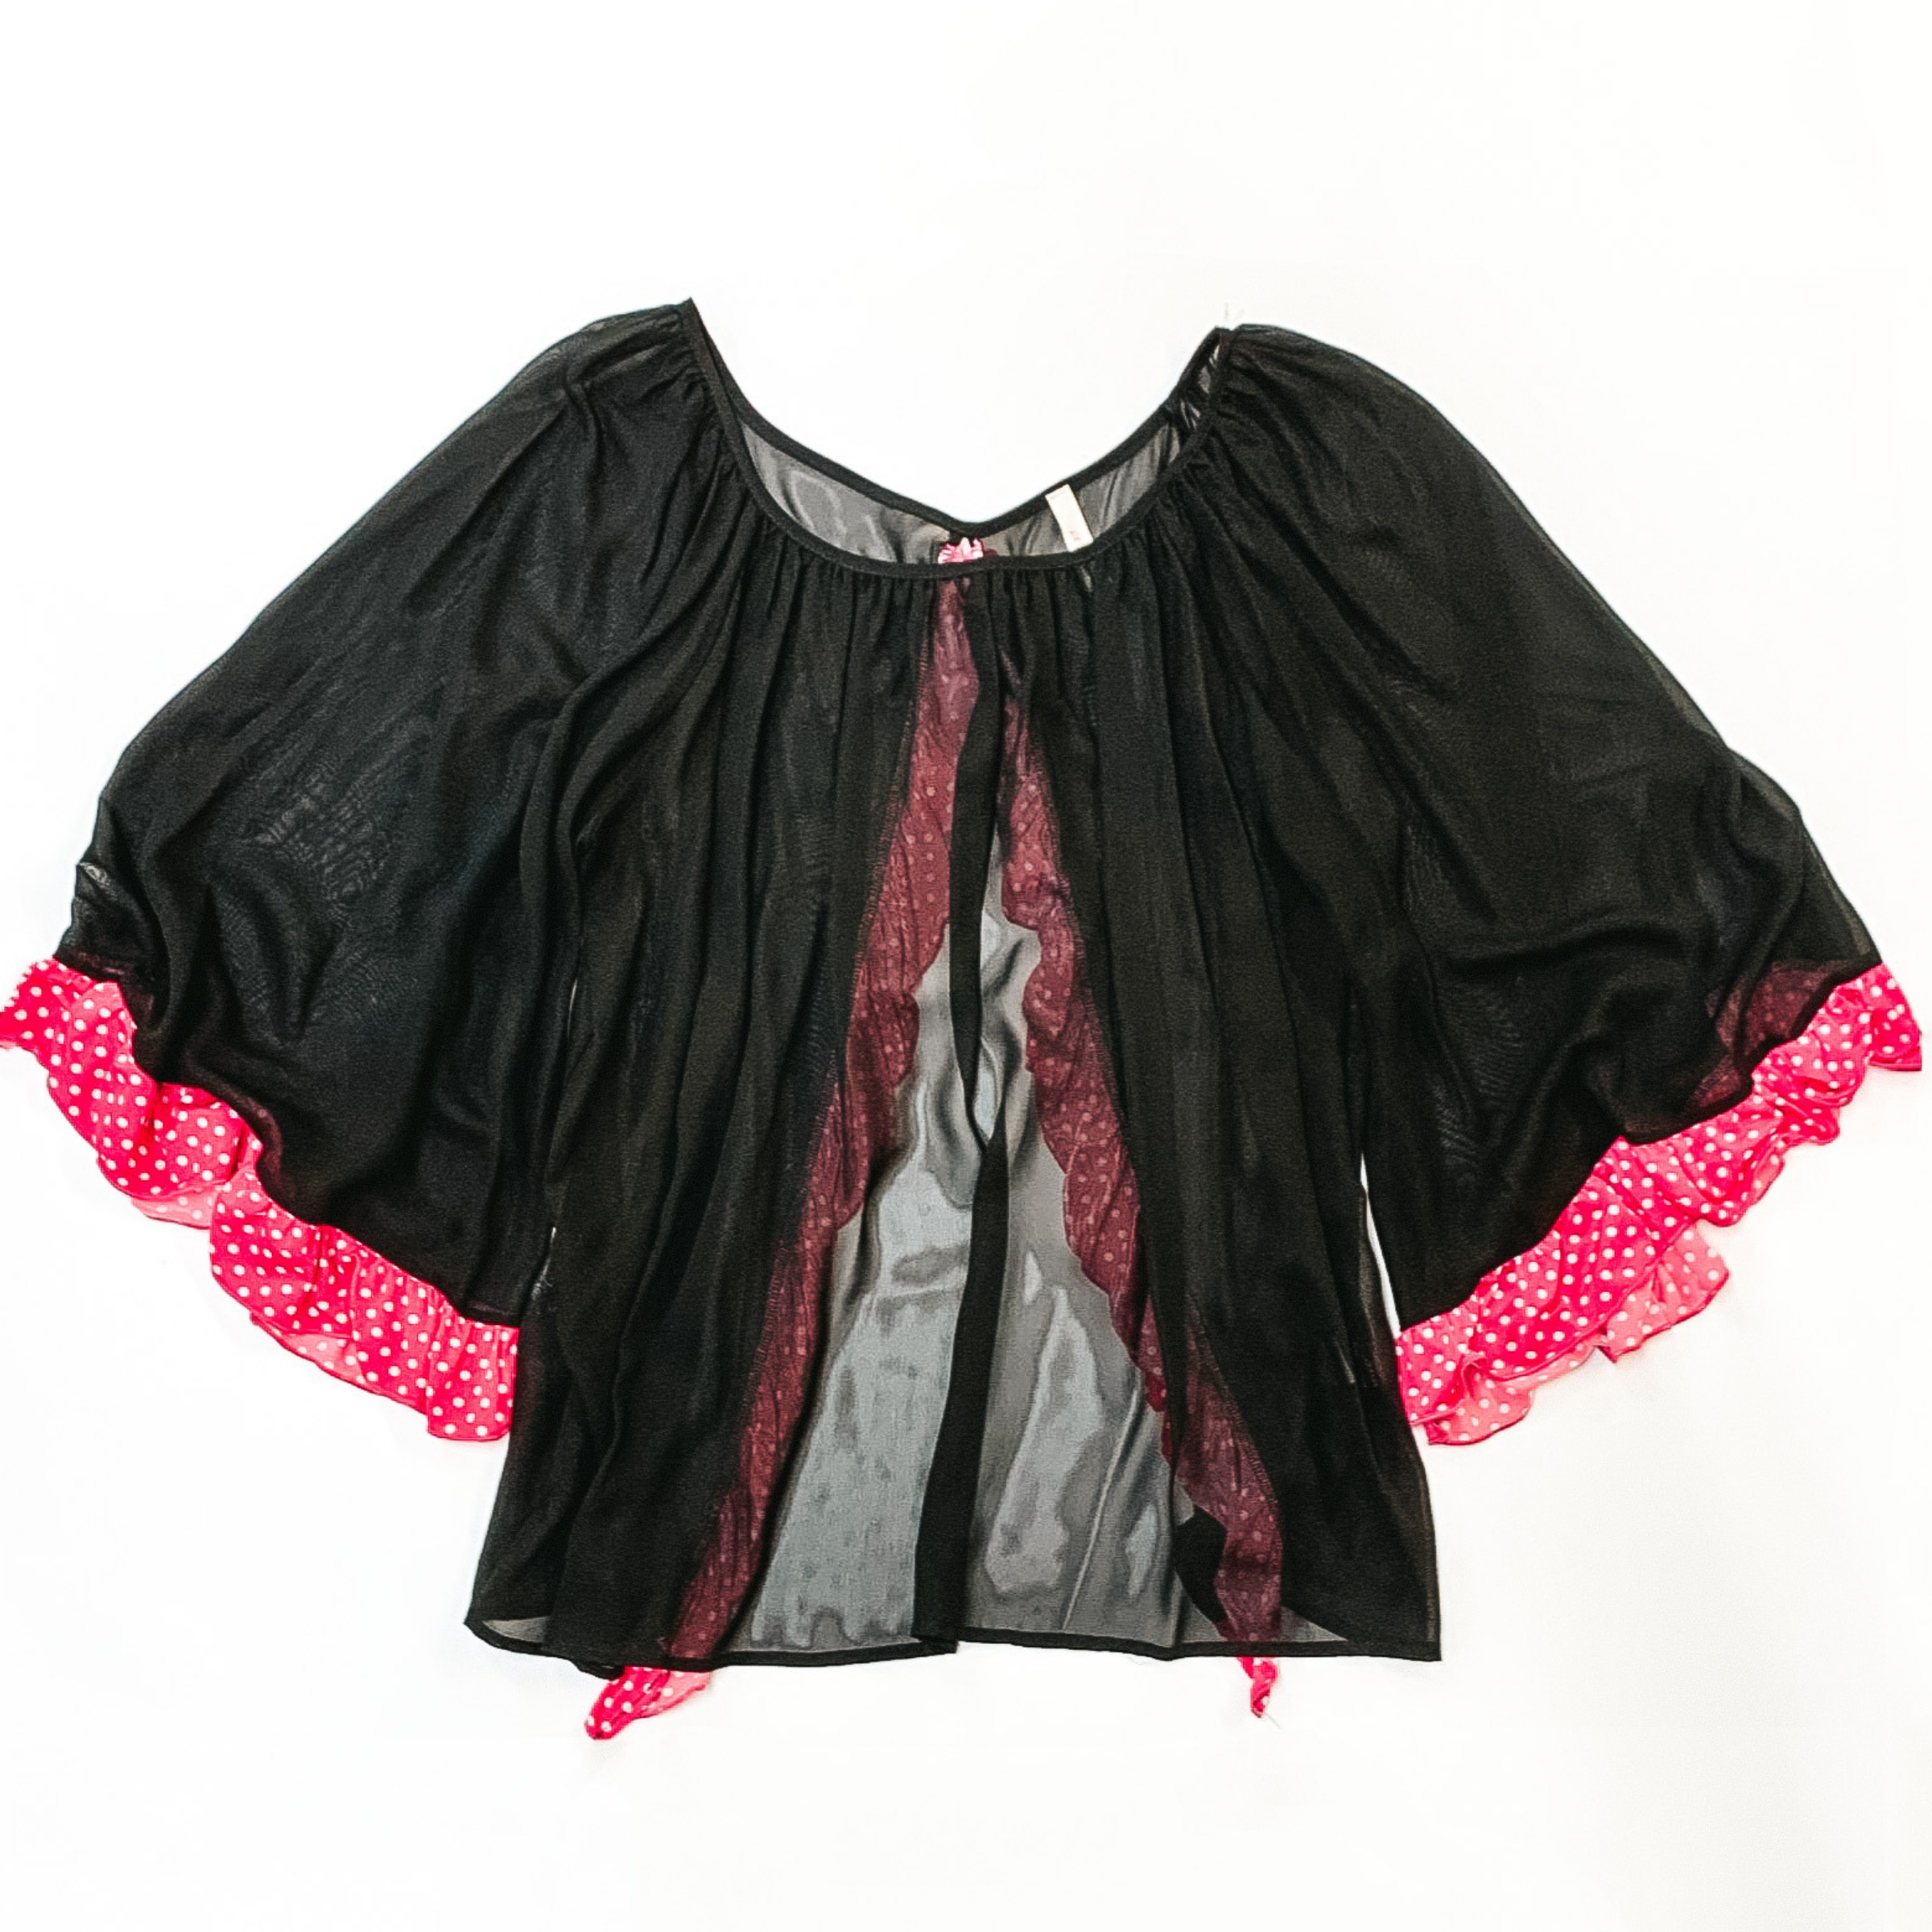 Last Chance Size 3XL | Sheer Open Back Blouse with Pink Dotted Ruffle Hemlines in Black - Giddy Up Glamour Boutique